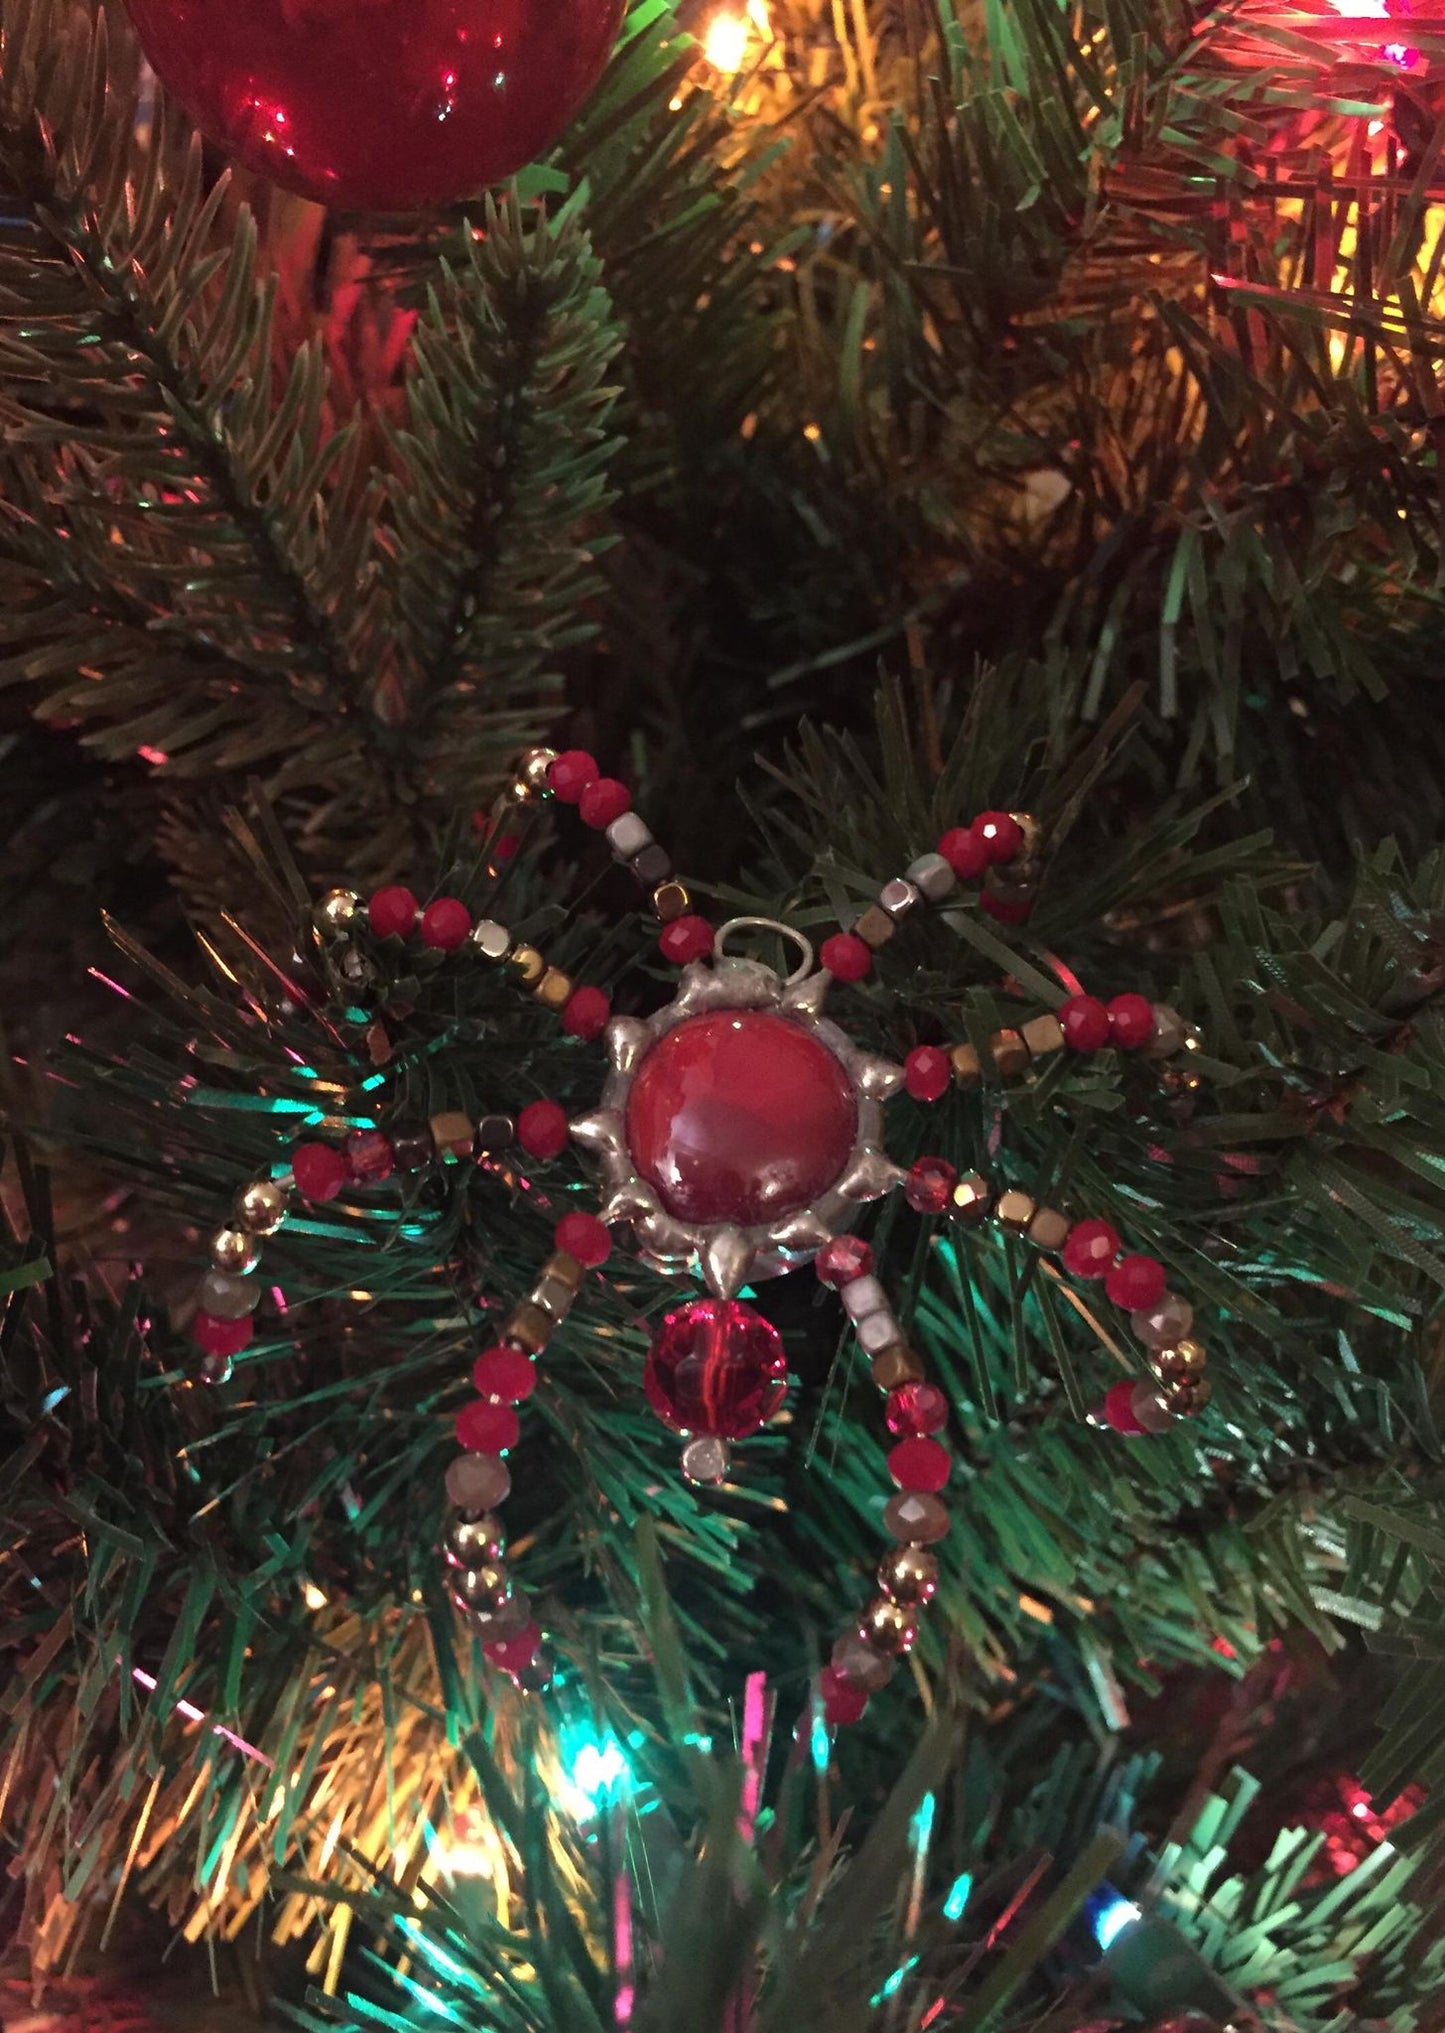 The Christmas Spider